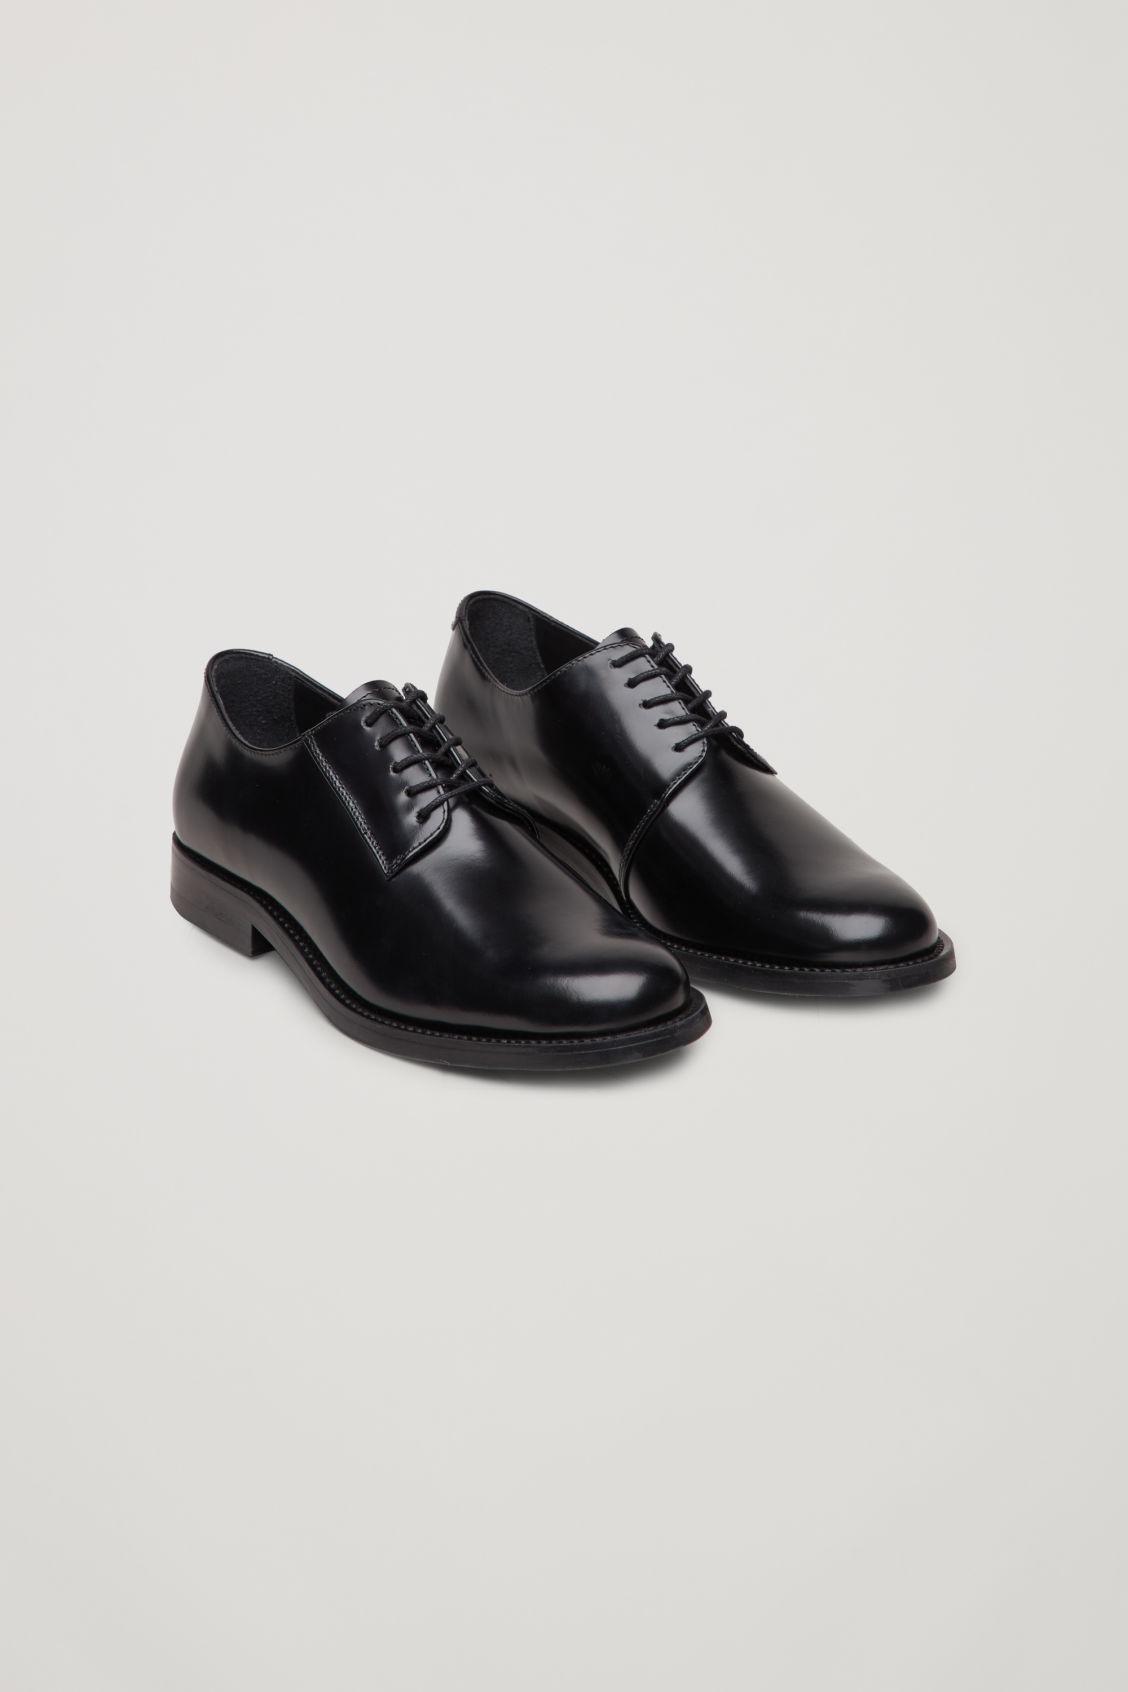 COS Round-toe Leather Oxford Shoes in 